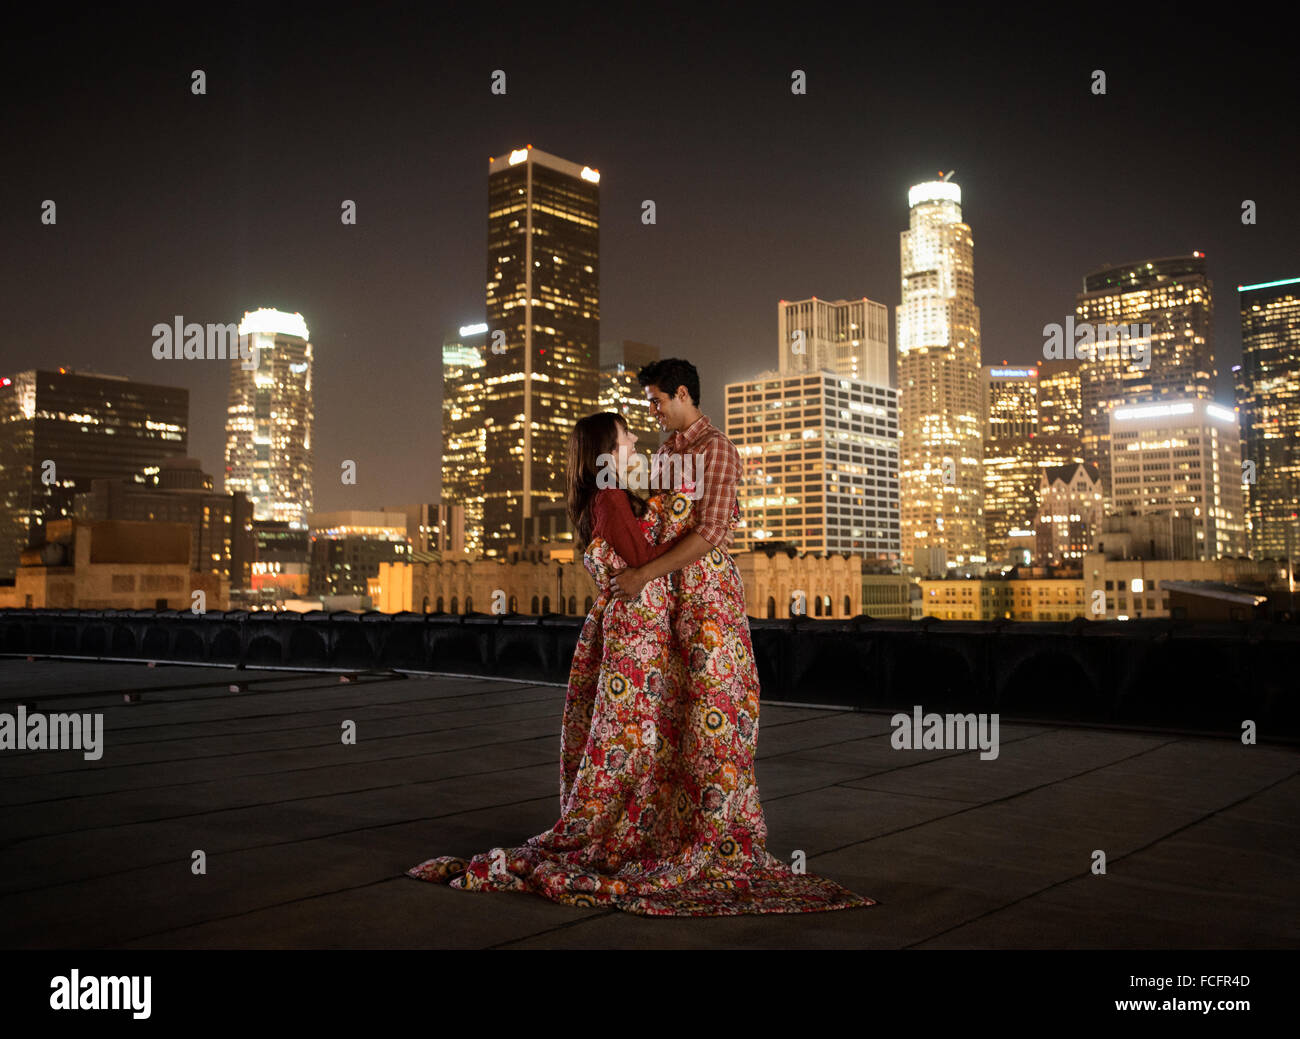 A couple on a rooftop overlooking Los Angeles at night, warpped in blankets. Stock Photo